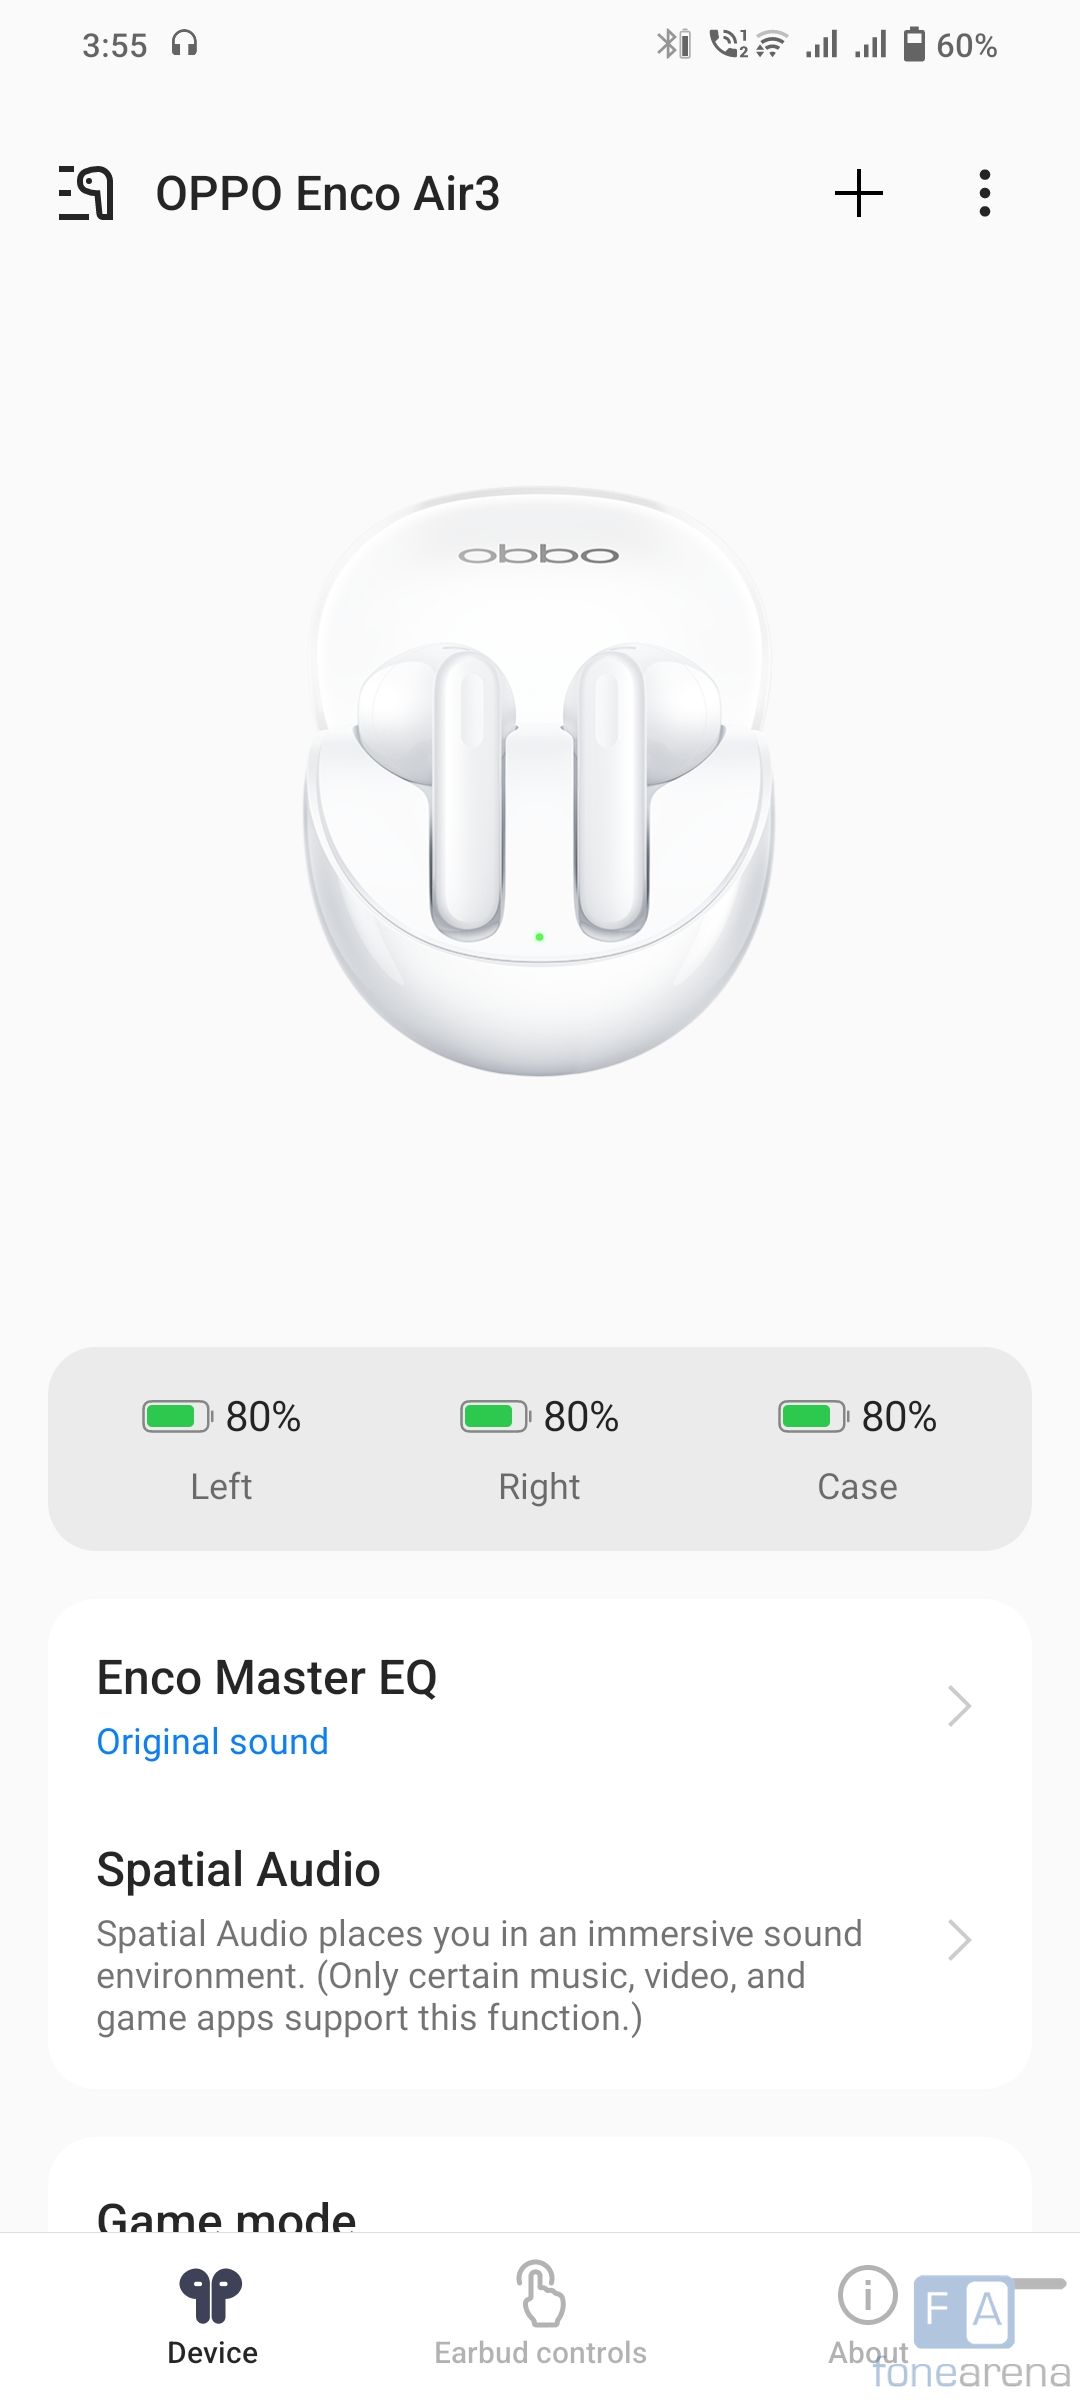 Oppo Enco Air 3 Pro noise-cancelling earbuds launched in India